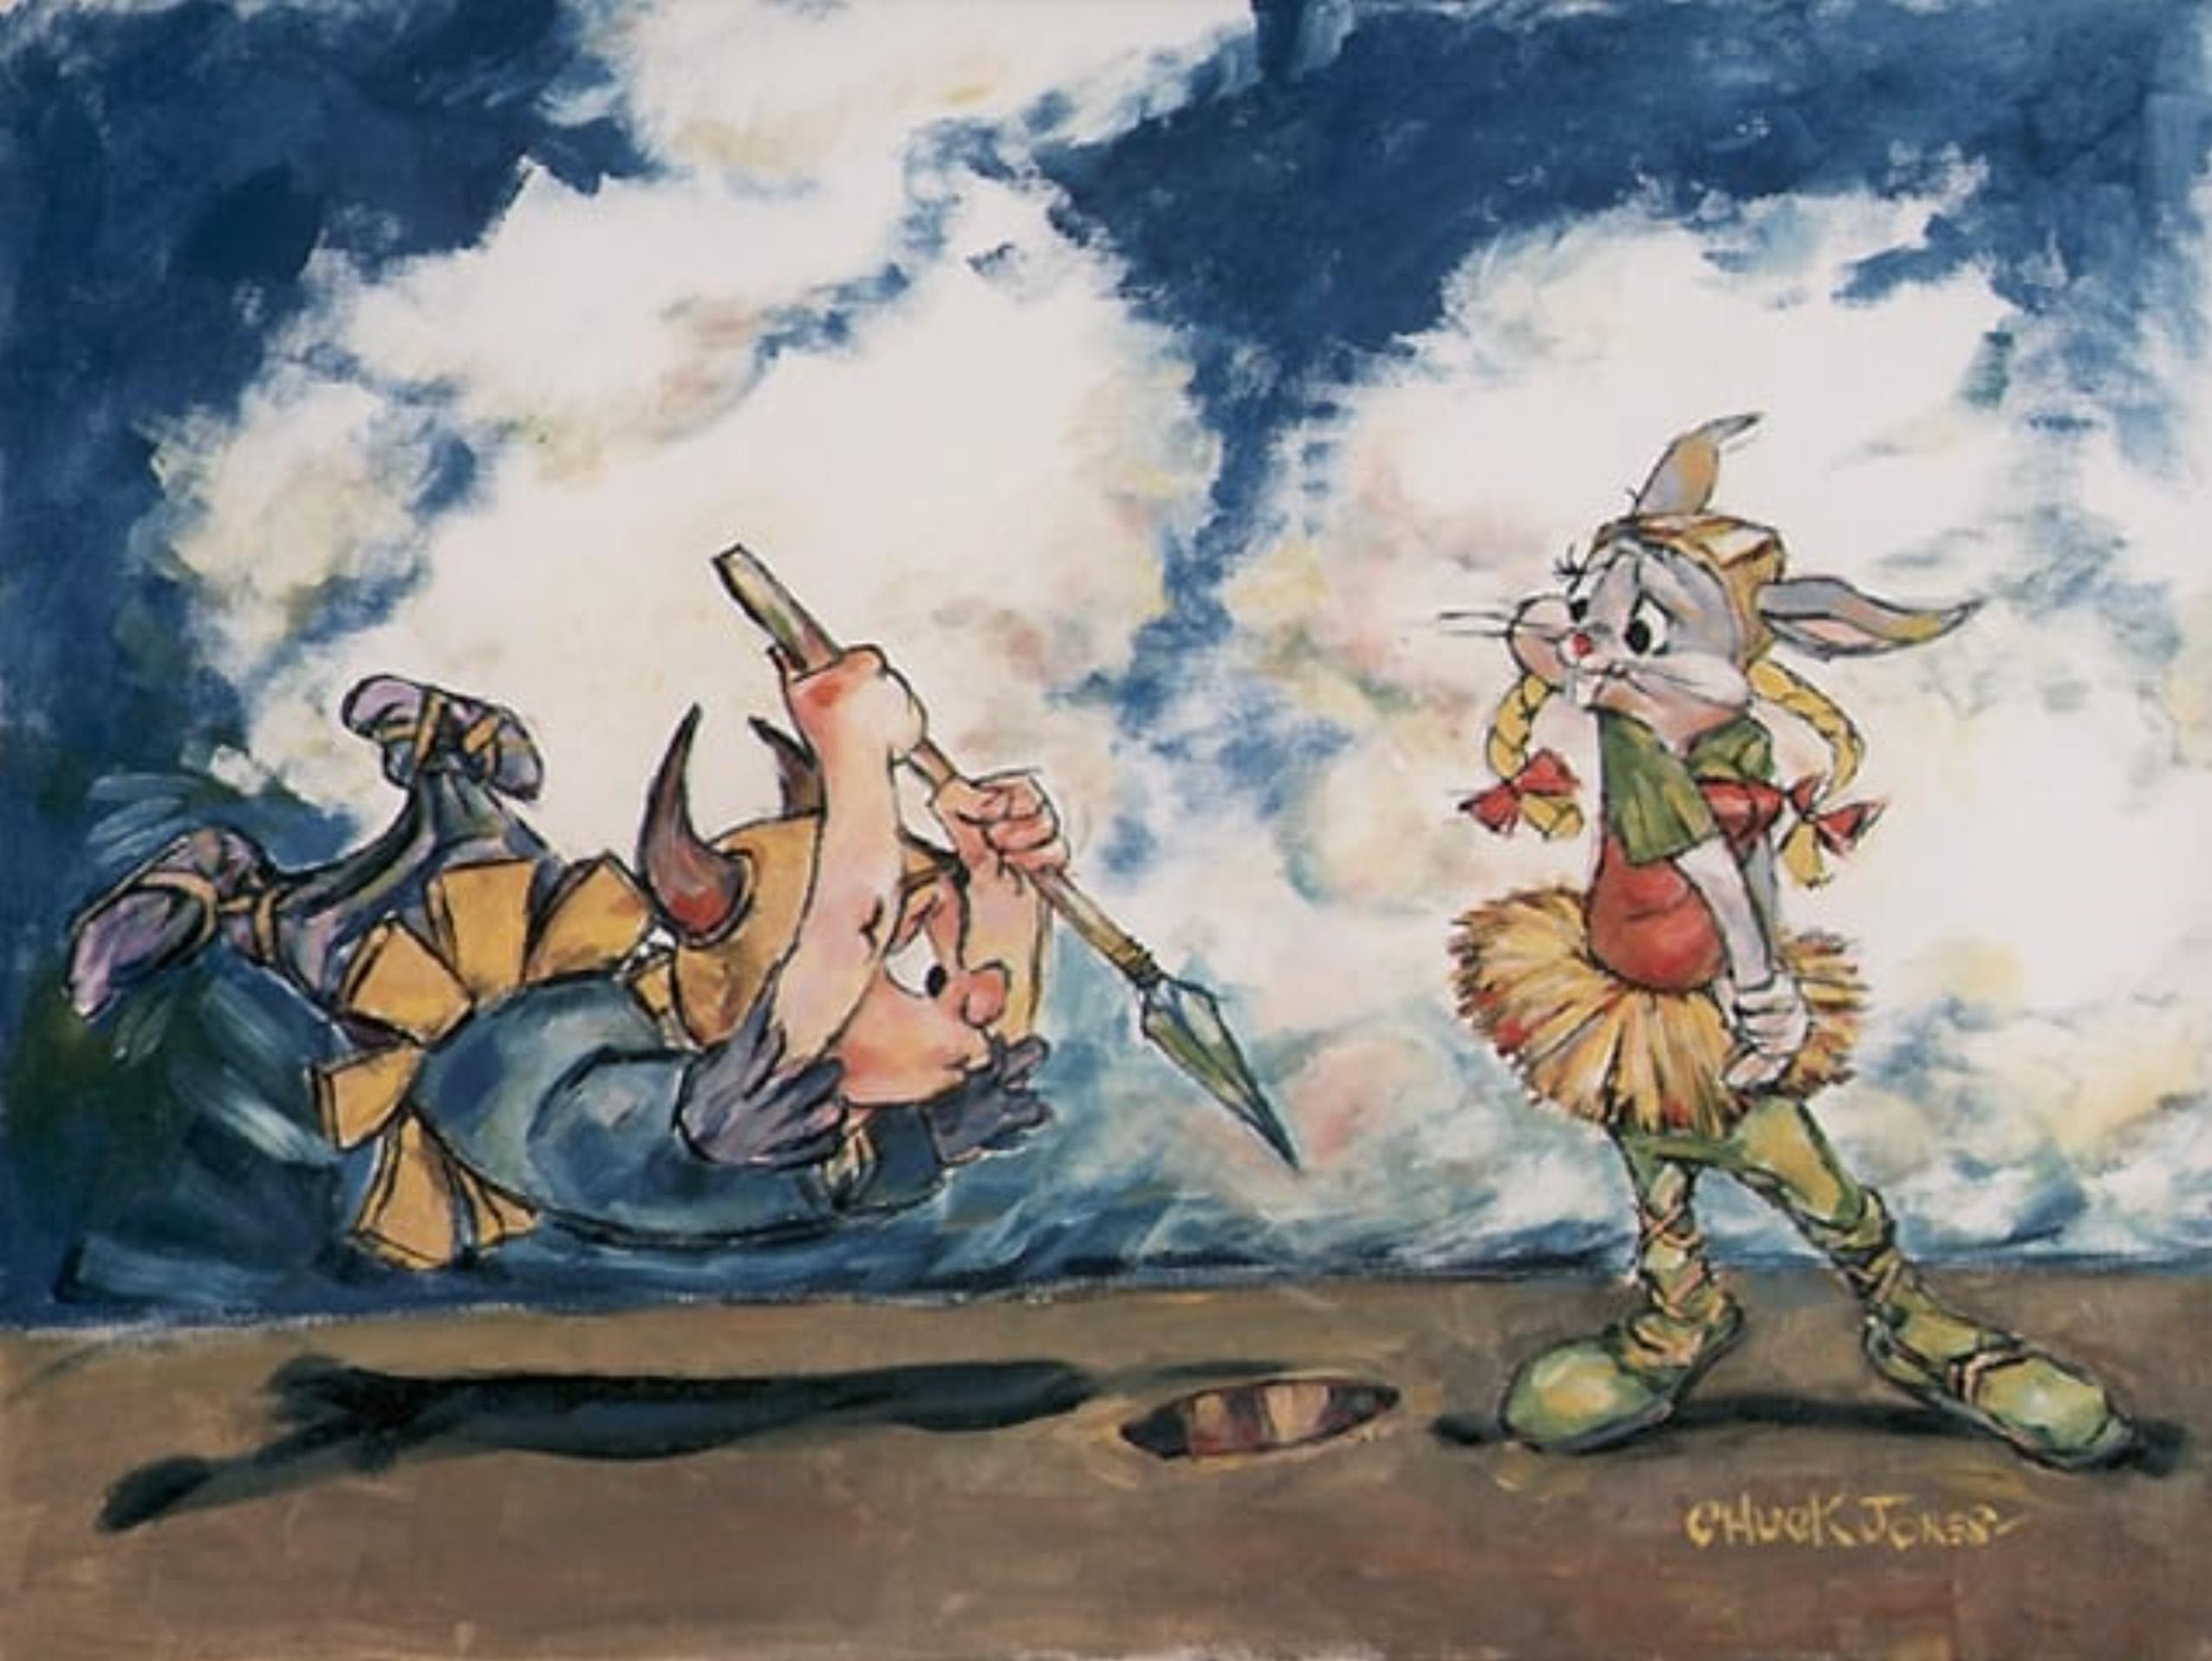 SPEAR AND MAGIC HELMET

MEDIUM: Giclee on Canvas
IMAGE SIZE: 18" x 24"
EDITION SIZE: 150
SKU: GICLEE-219

ABOUT THE IMAGE: Elmer Fudd trying to stab Bugs Bunny with a spear, but Bugs Bunny has on a magical helmet and is dressed like a woman.